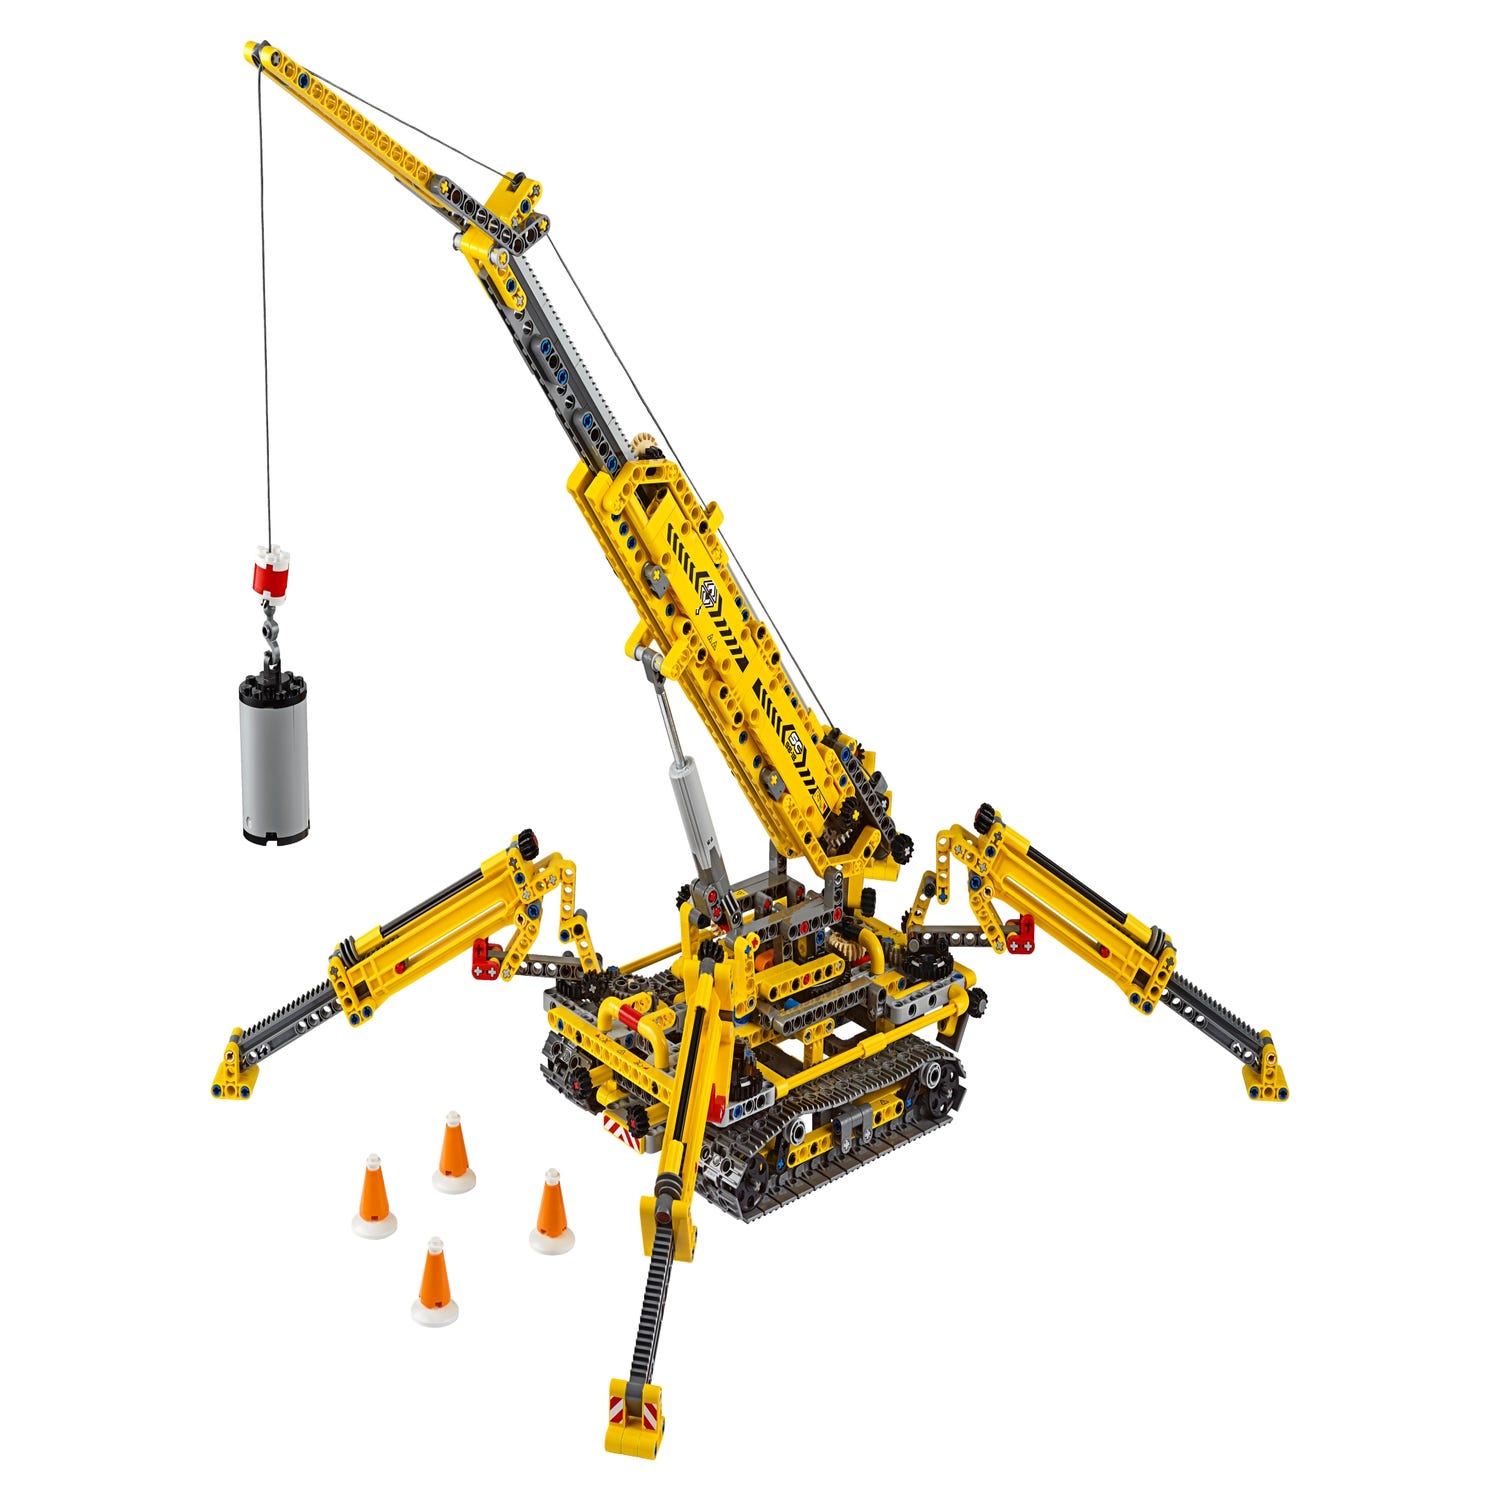 definitive ankomme chokerende Compact Crawler Crane 42097 | Technic™ | Buy online at the Official LEGO®  Shop US